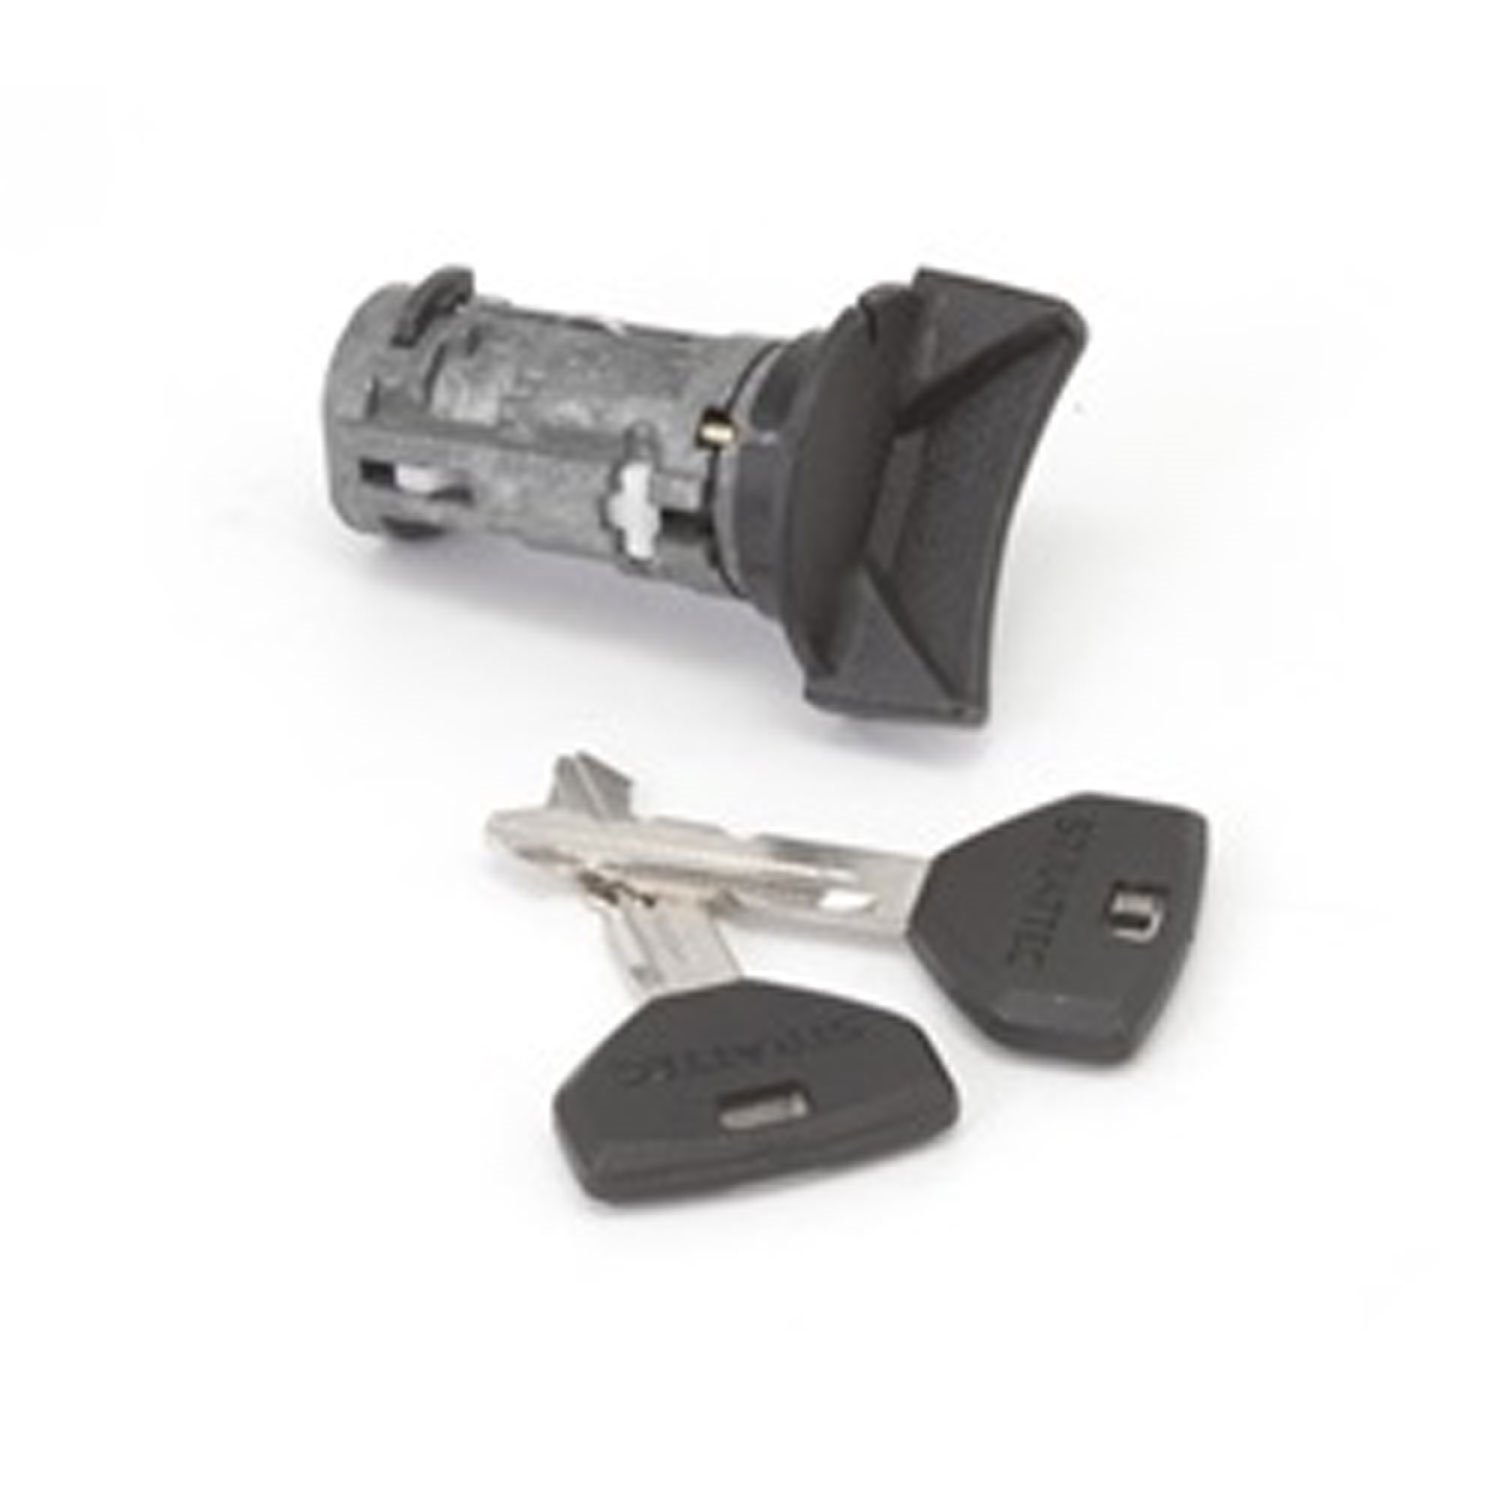 Replacement ignition lock cylinder from Omix-ADA, Fits 90-96 Jeep Cherokee and 90-95 Wrangler Includes 2 keys.